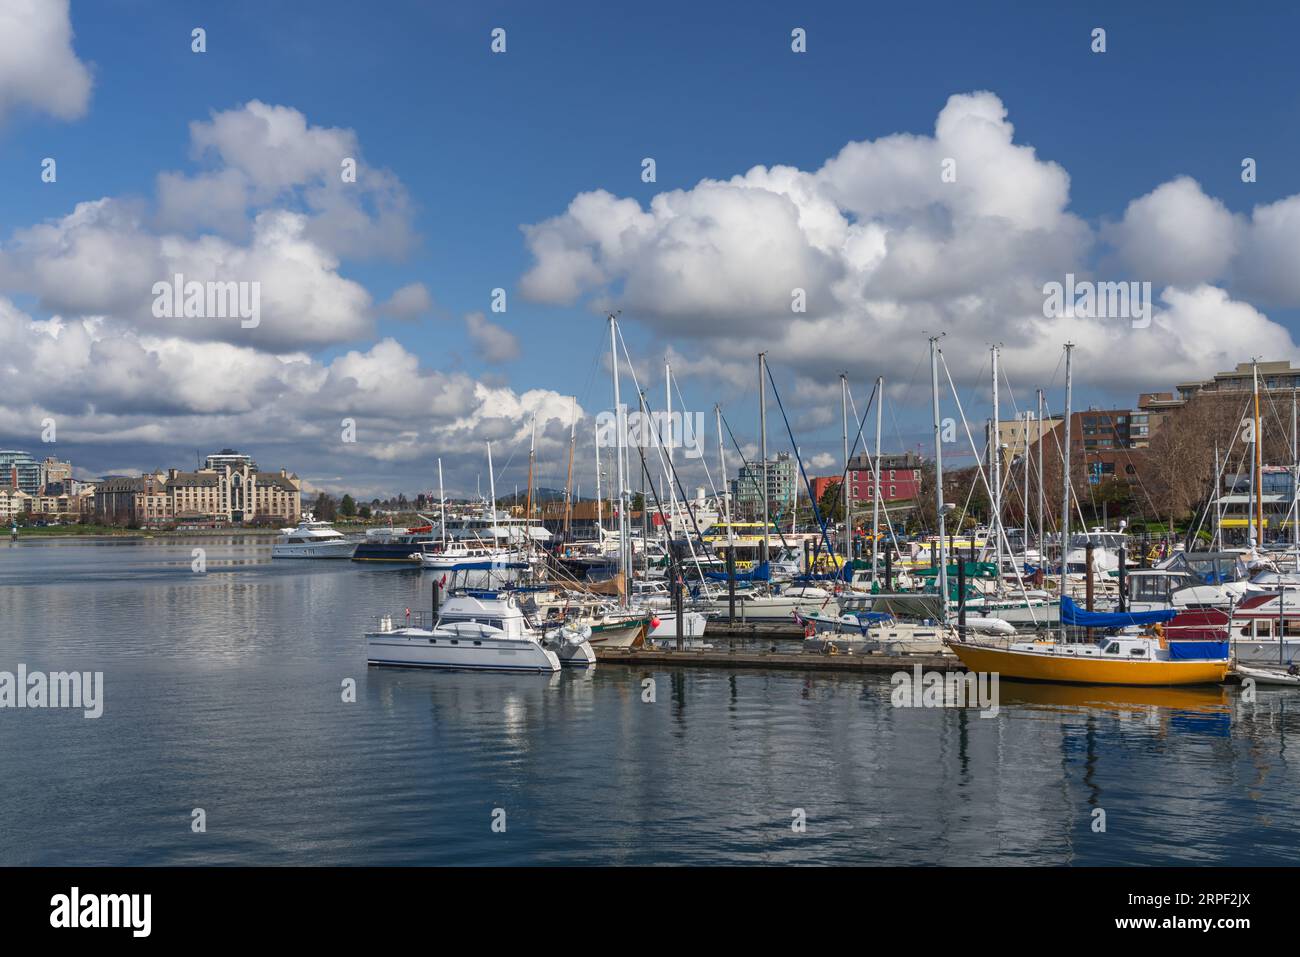 The  marina with boats in the inner harbor  of Victoria, Vancouver Island, British Columbia, Canada. Stock Photo